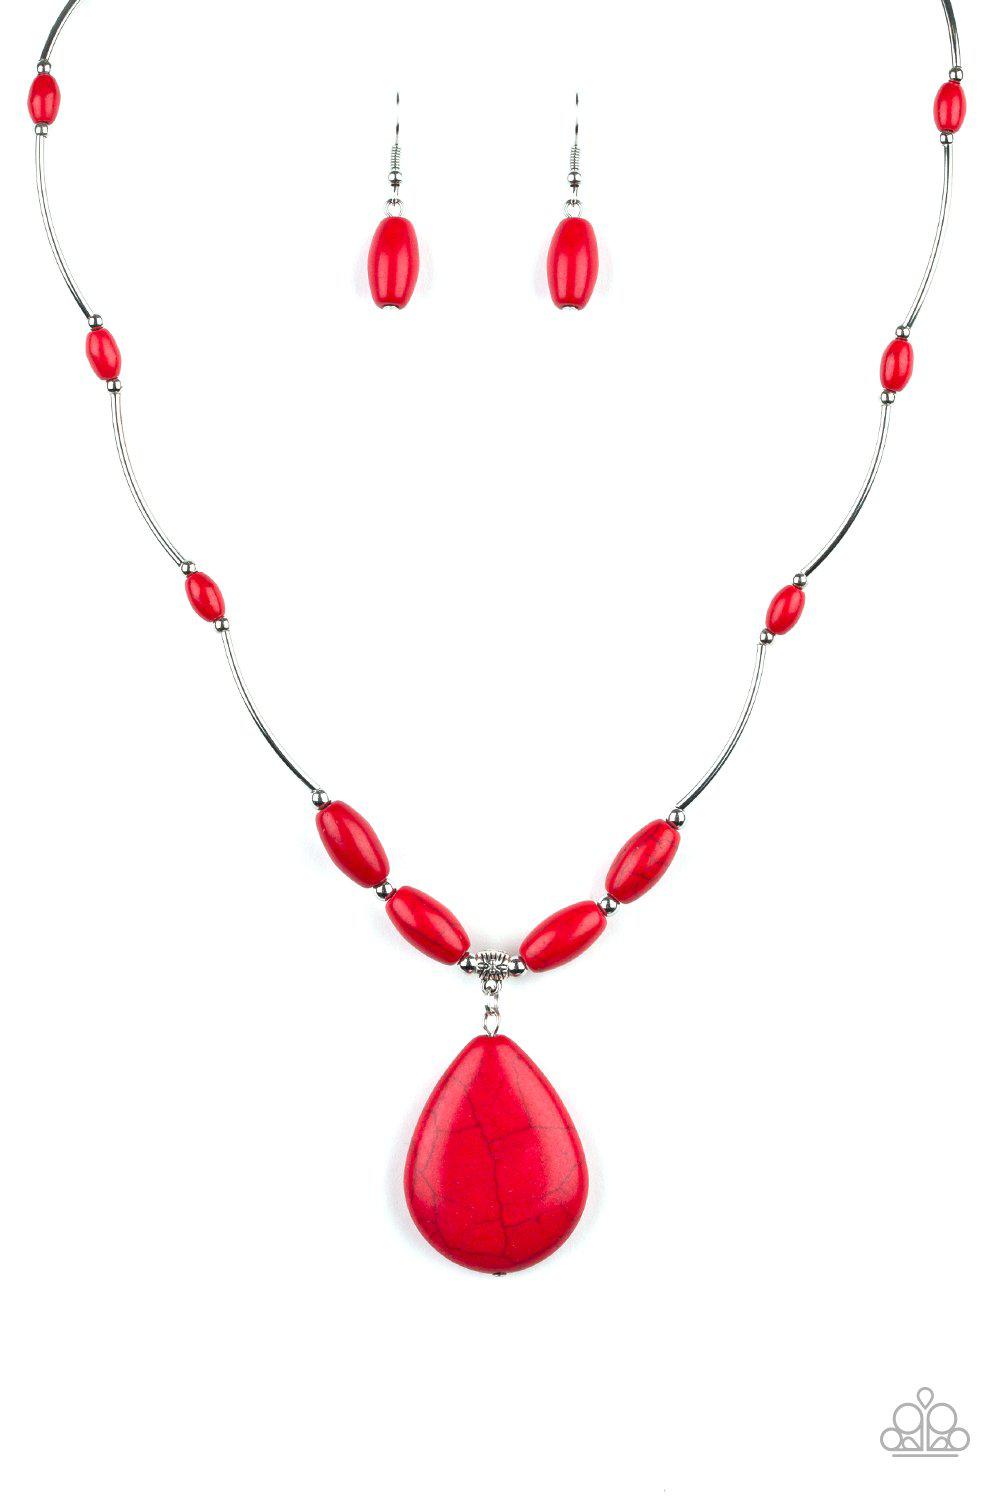 Explore The Elements Red Stone Necklace - Paparazzi Accessories-CarasShop.com - $5 Jewelry by Cara Jewels